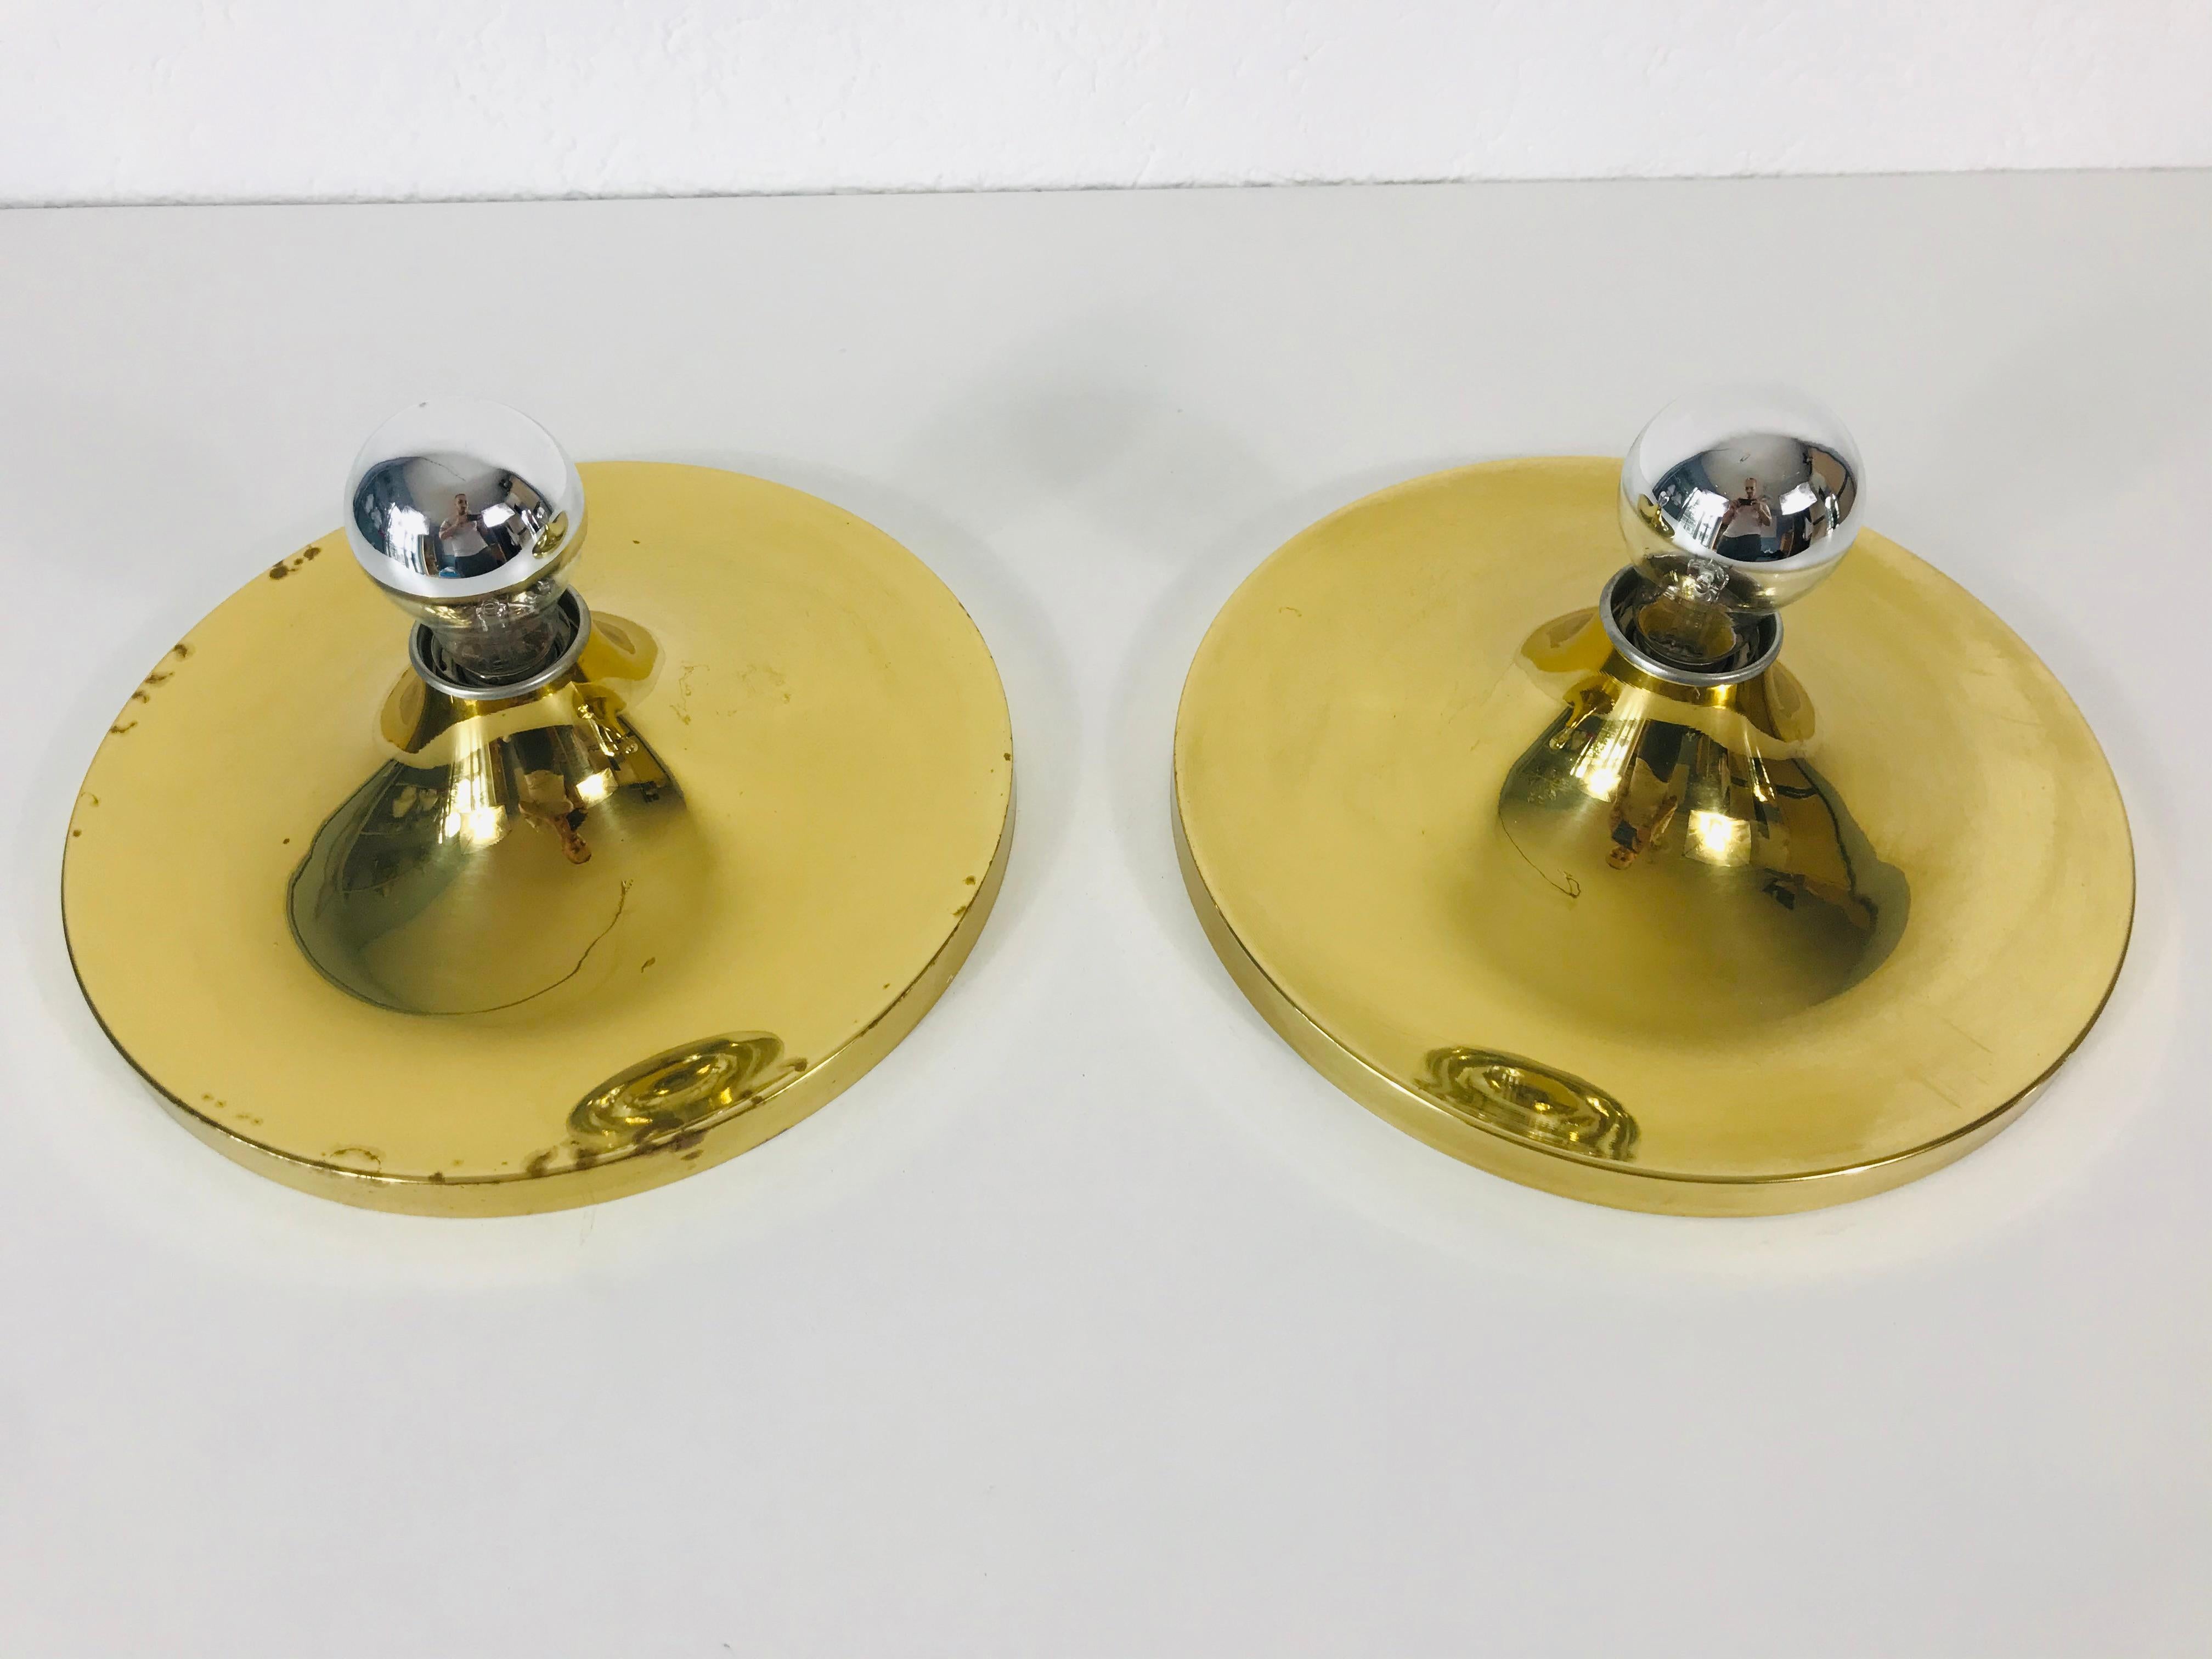 Exceptional Pair of Golden Mid-Century Modern Wall Lamps, 1960s, Germany In Good Condition For Sale In Hagenbach, DE